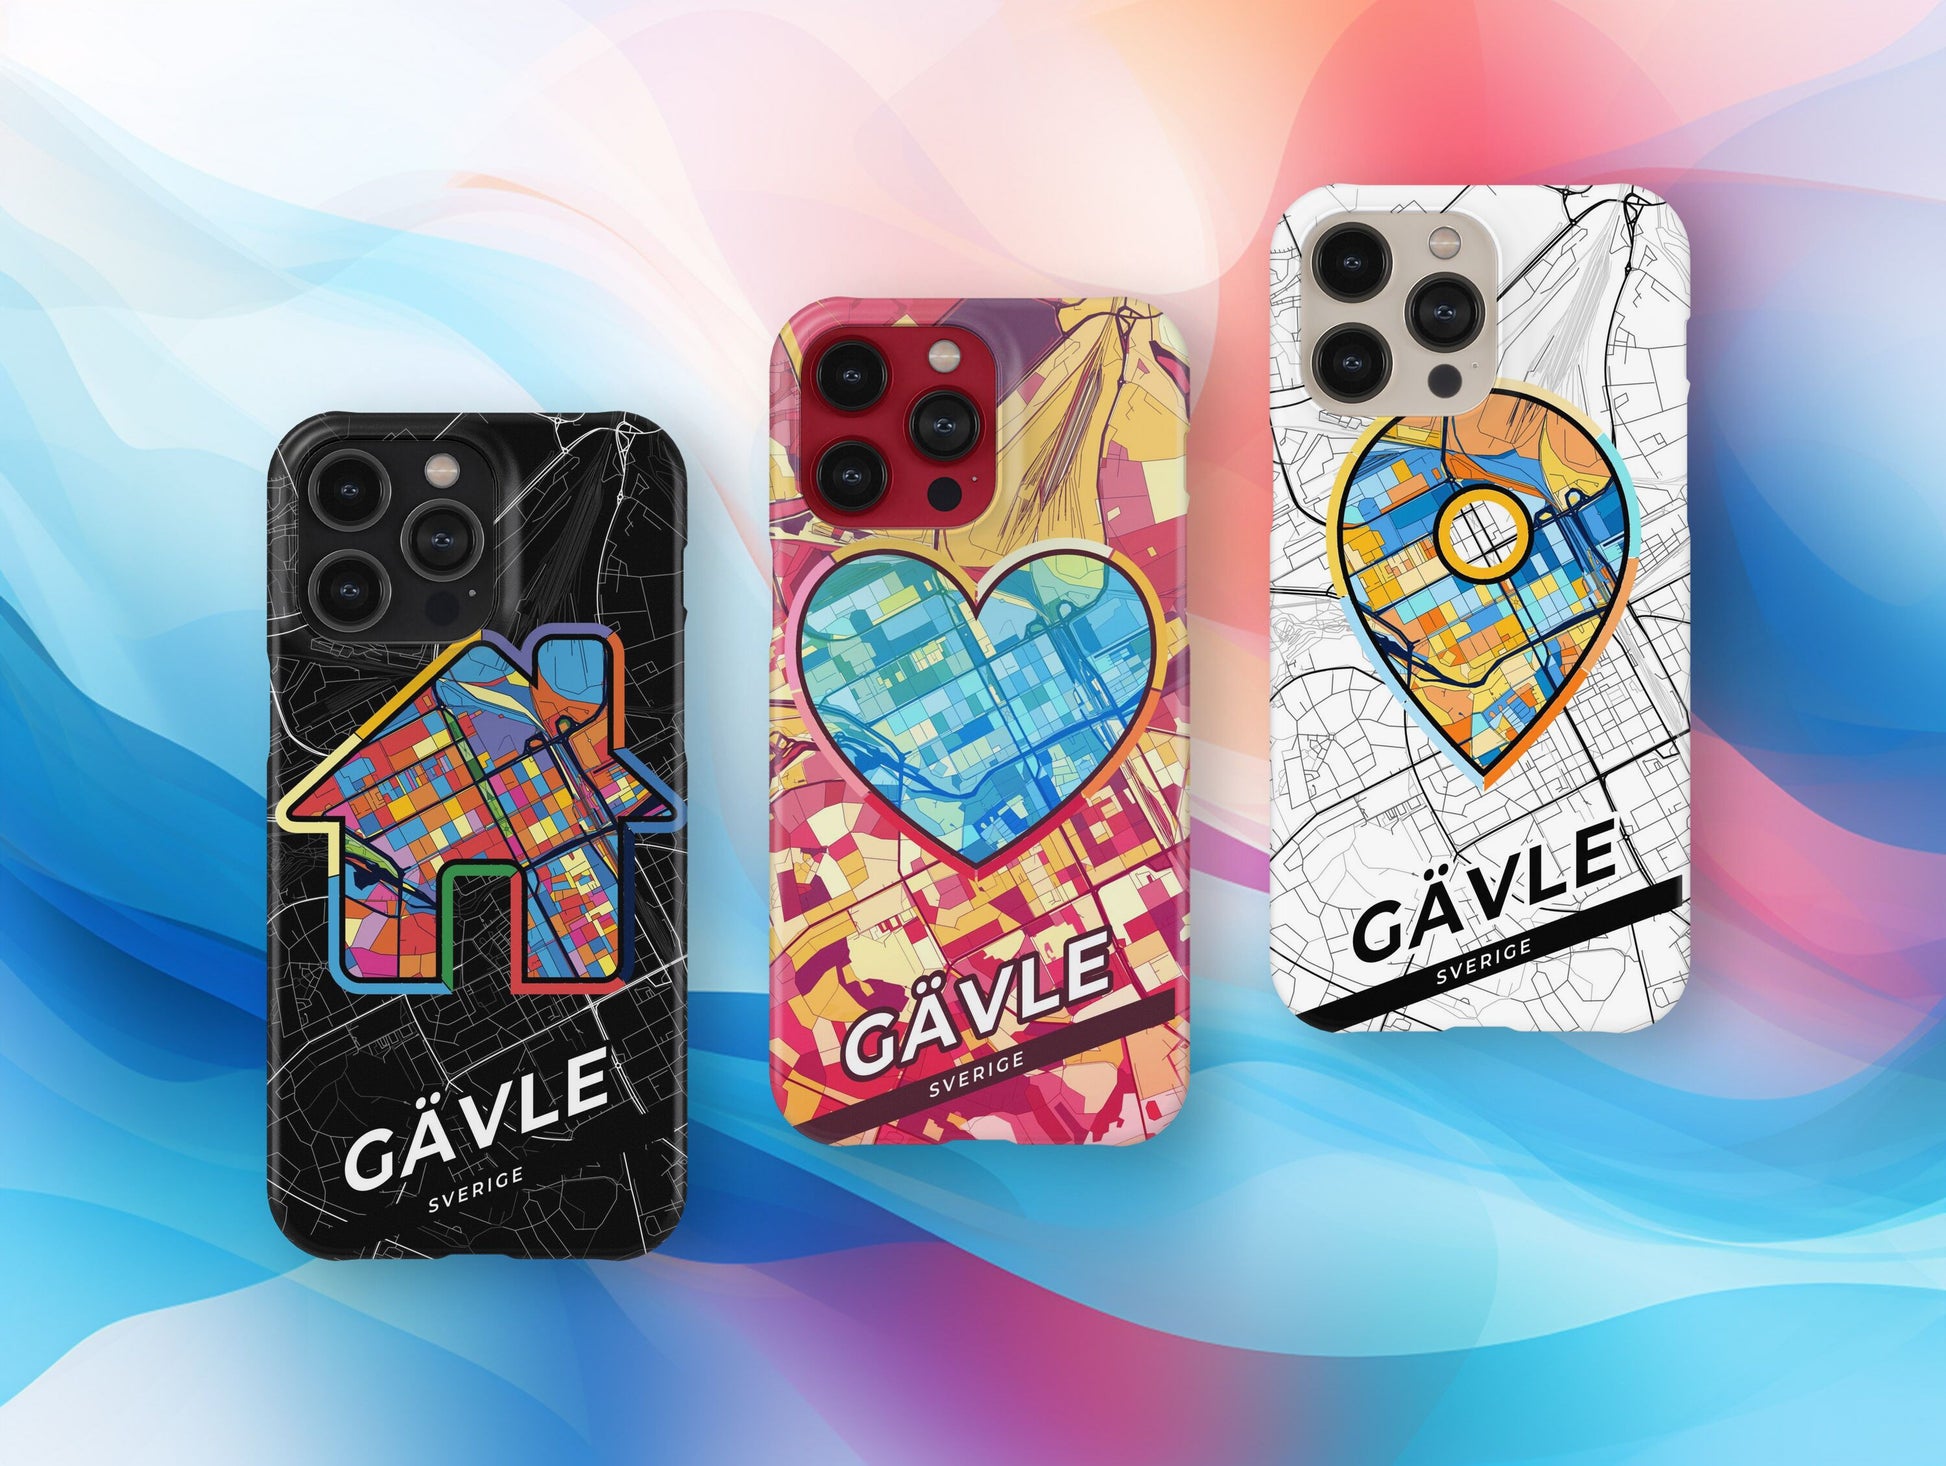 Gävle Sweden slim phone case with colorful icon. Birthday, wedding or housewarming gift. Couple match cases.